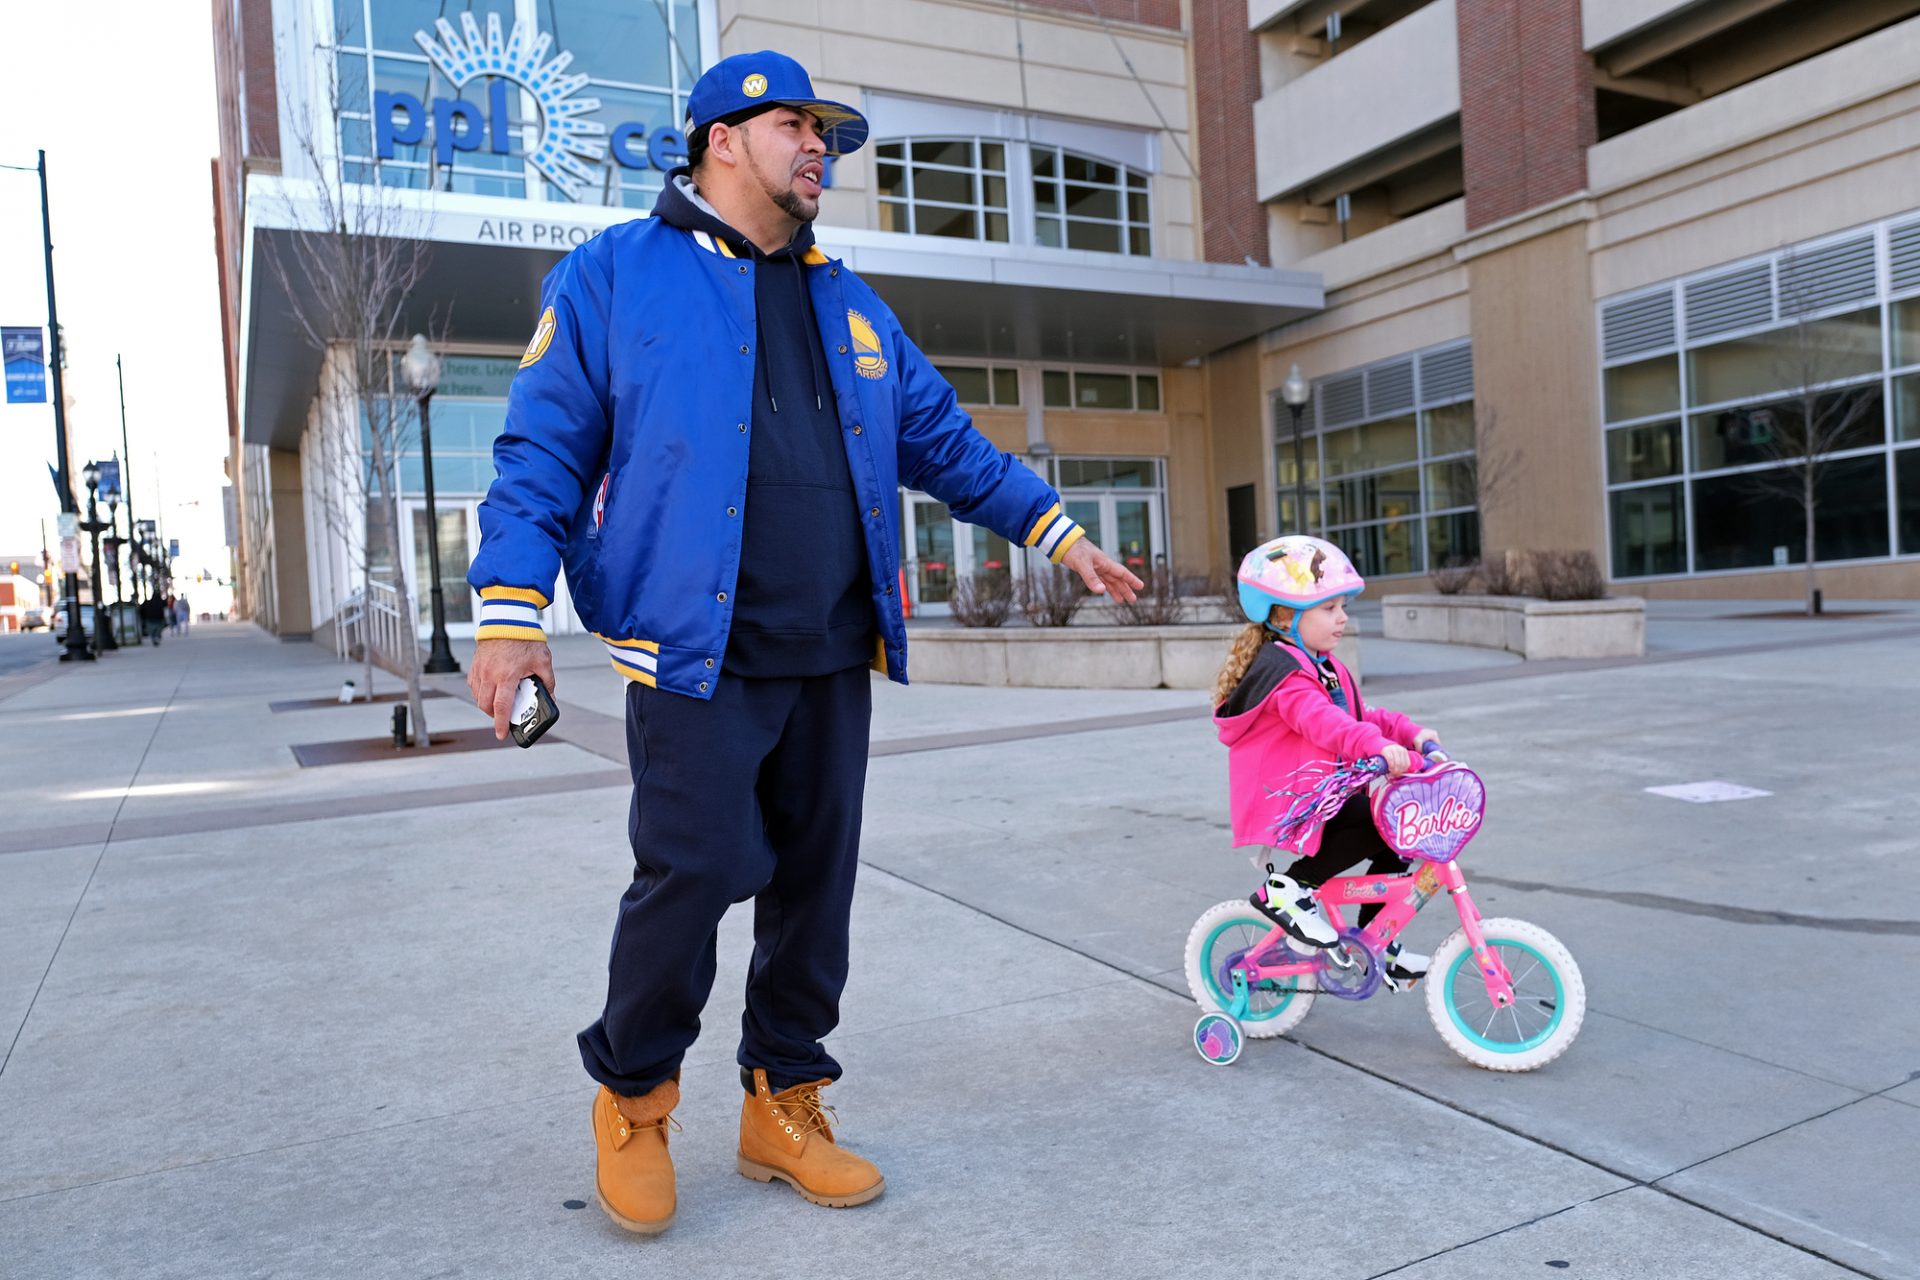 Edward Zayas, Jr., of Allentown, walks with his stepdaughter Avery Green, 4, as she rides her bike near the PPL Center in Allentown. Zayas is a chef at a bistro and has been working a lot to accommodate the increased demand for takeout and delivery orders. "We just had to get out," he said.